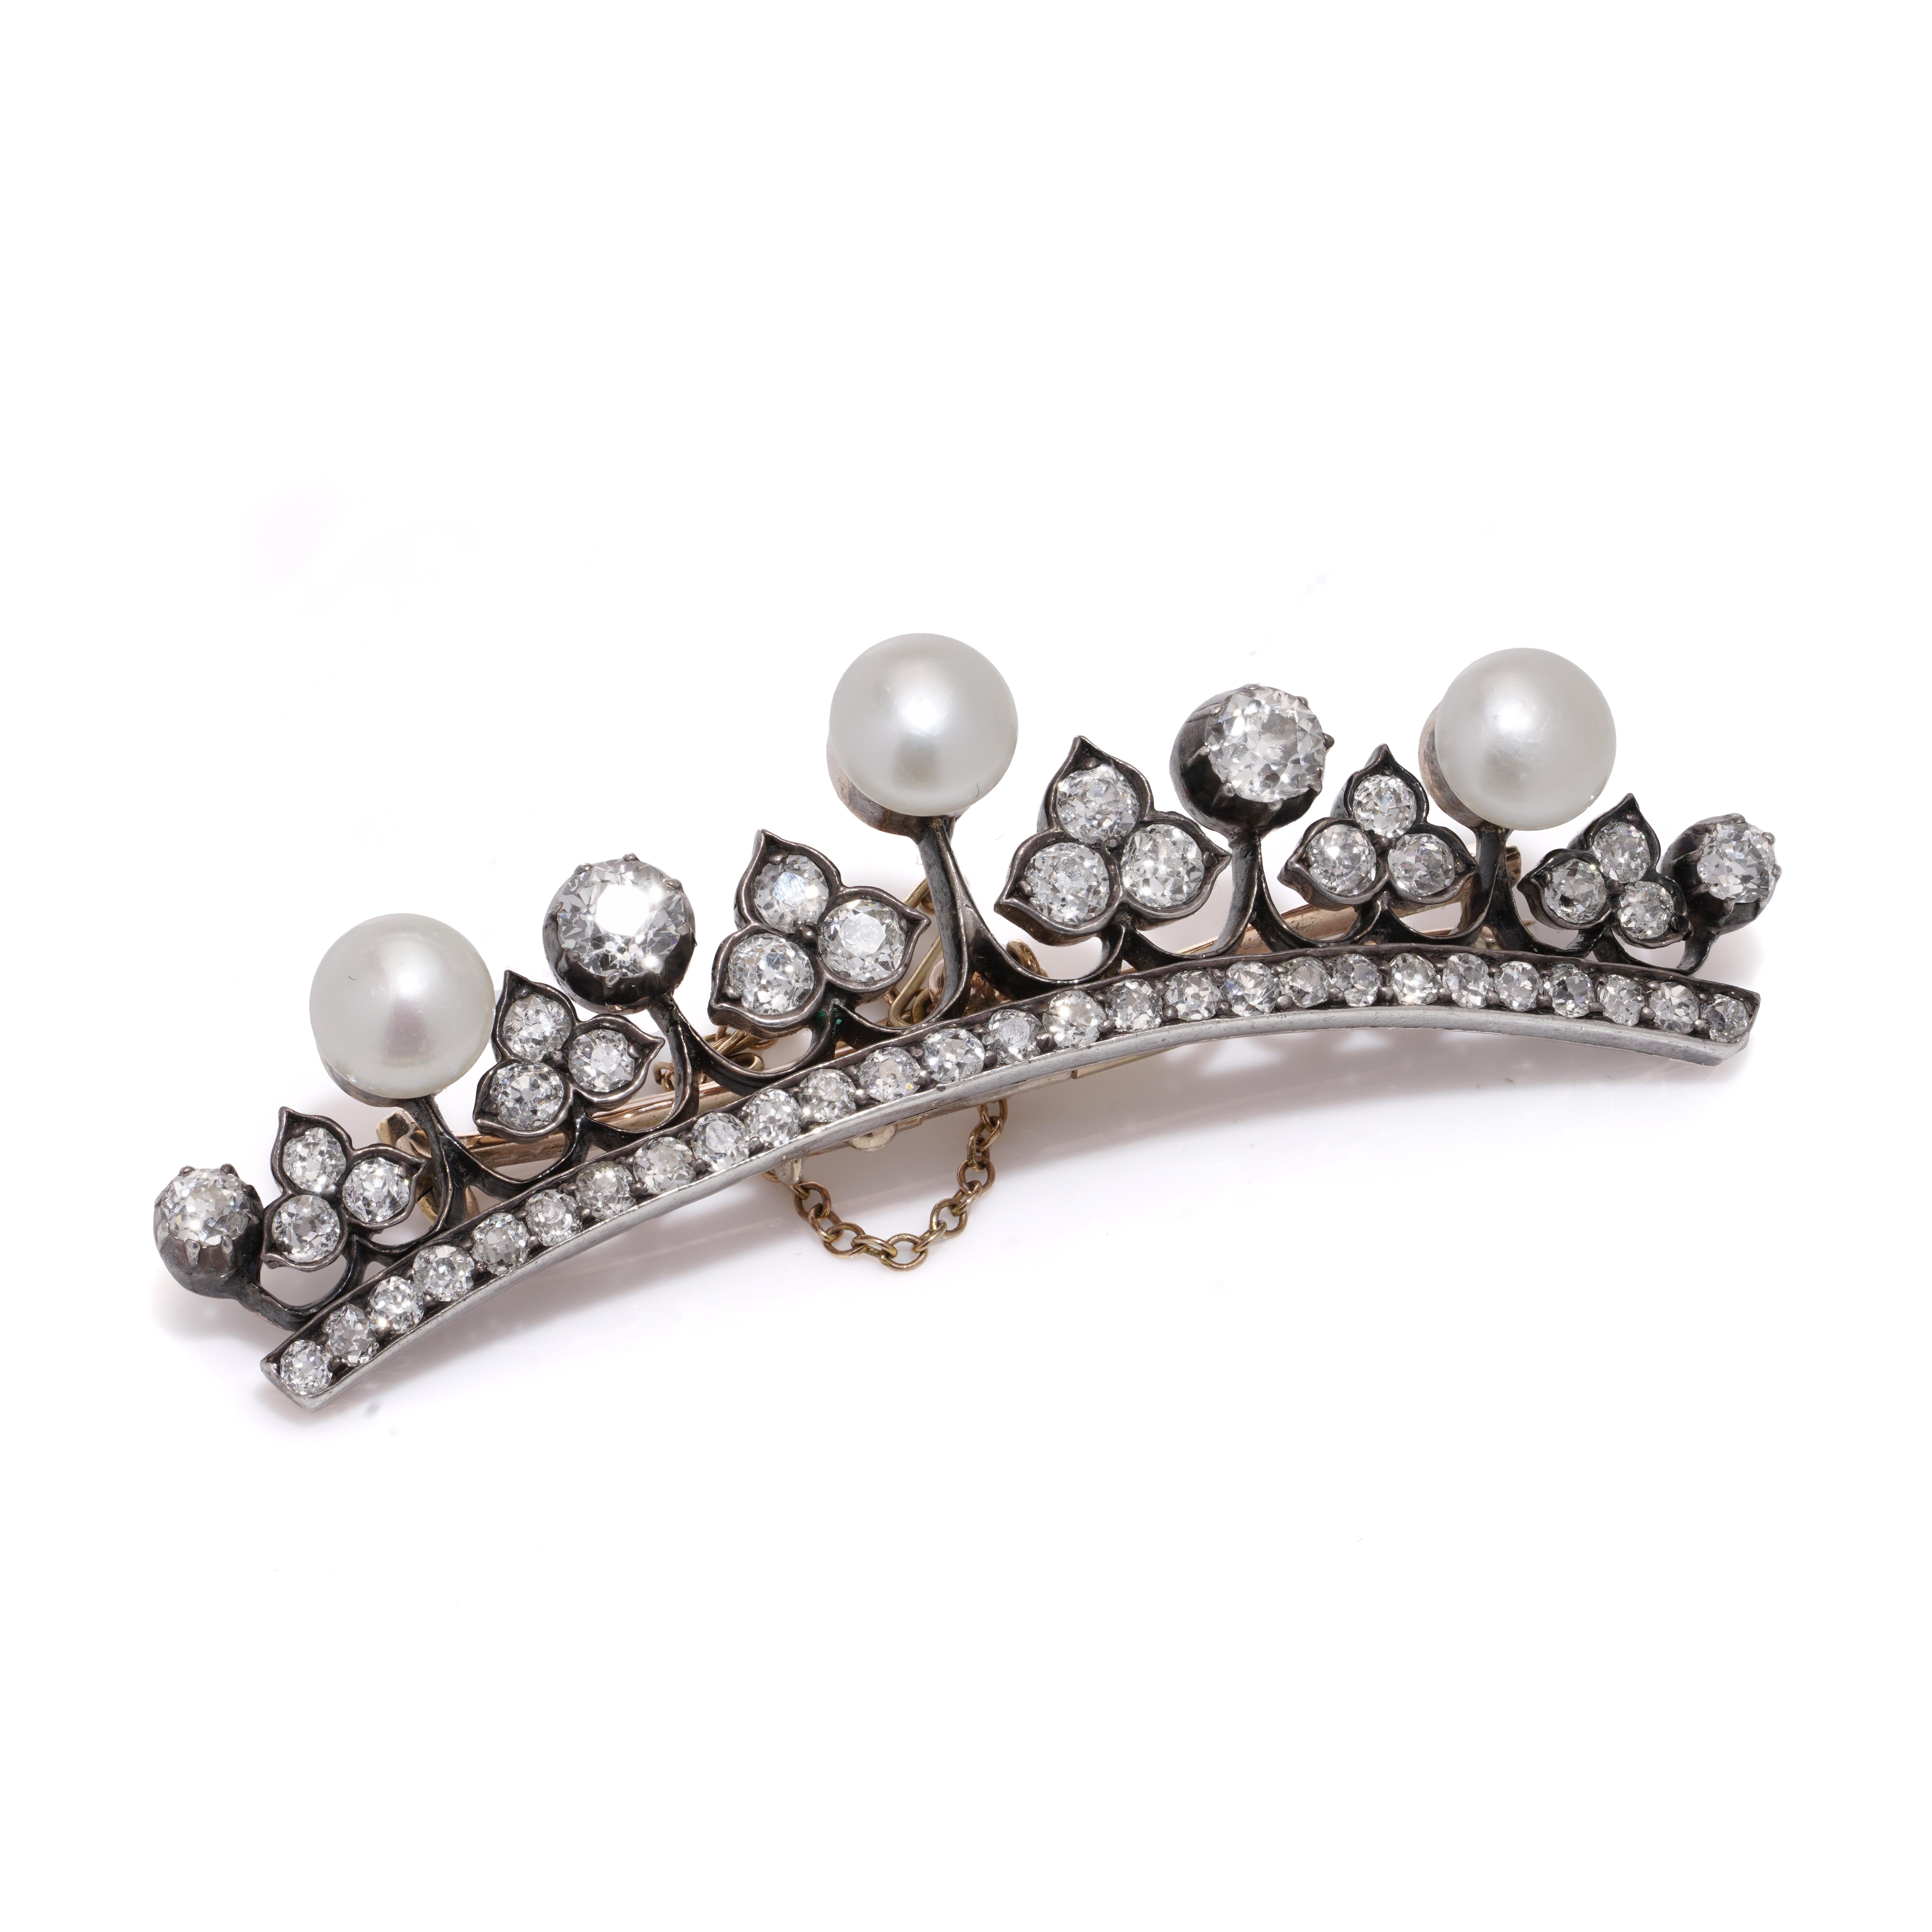 Victorian 15kt Rose Gold Diamond & Pearl Tiara Brooch For Sale 1